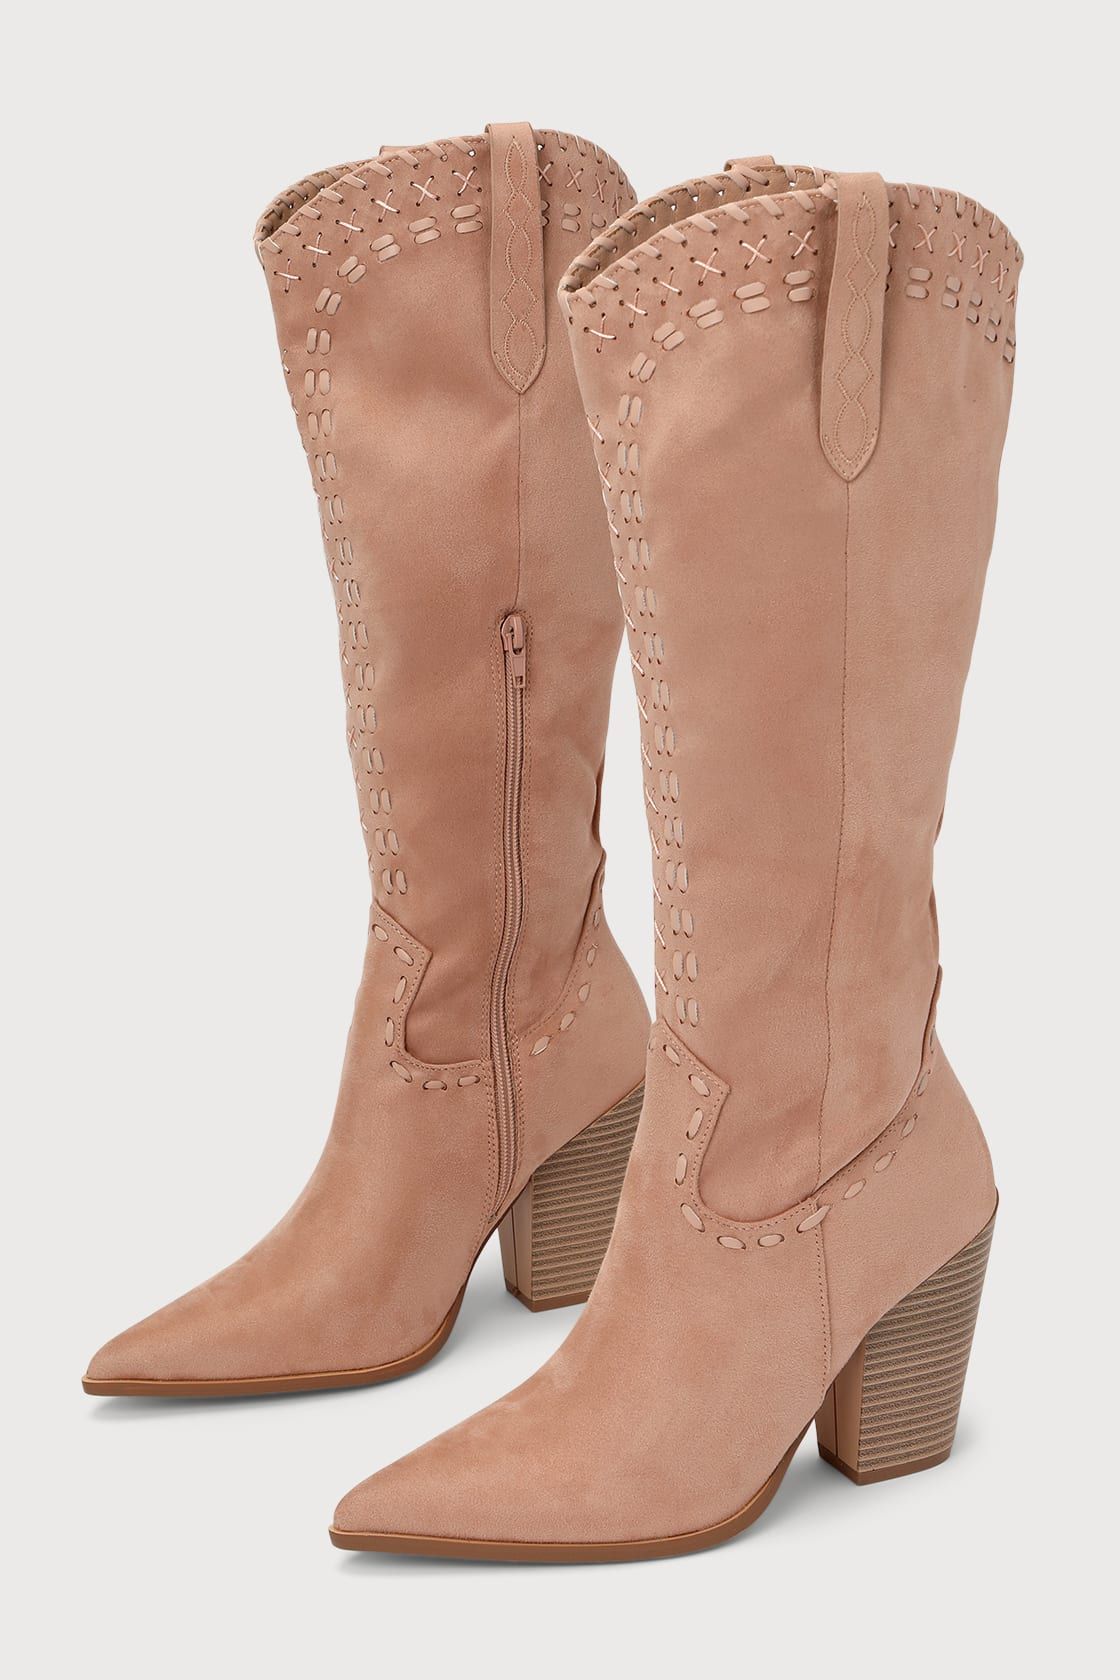 Yohana Dusty Rose Suede Pointed-Toe Knee-High Boots | Lulus (US)